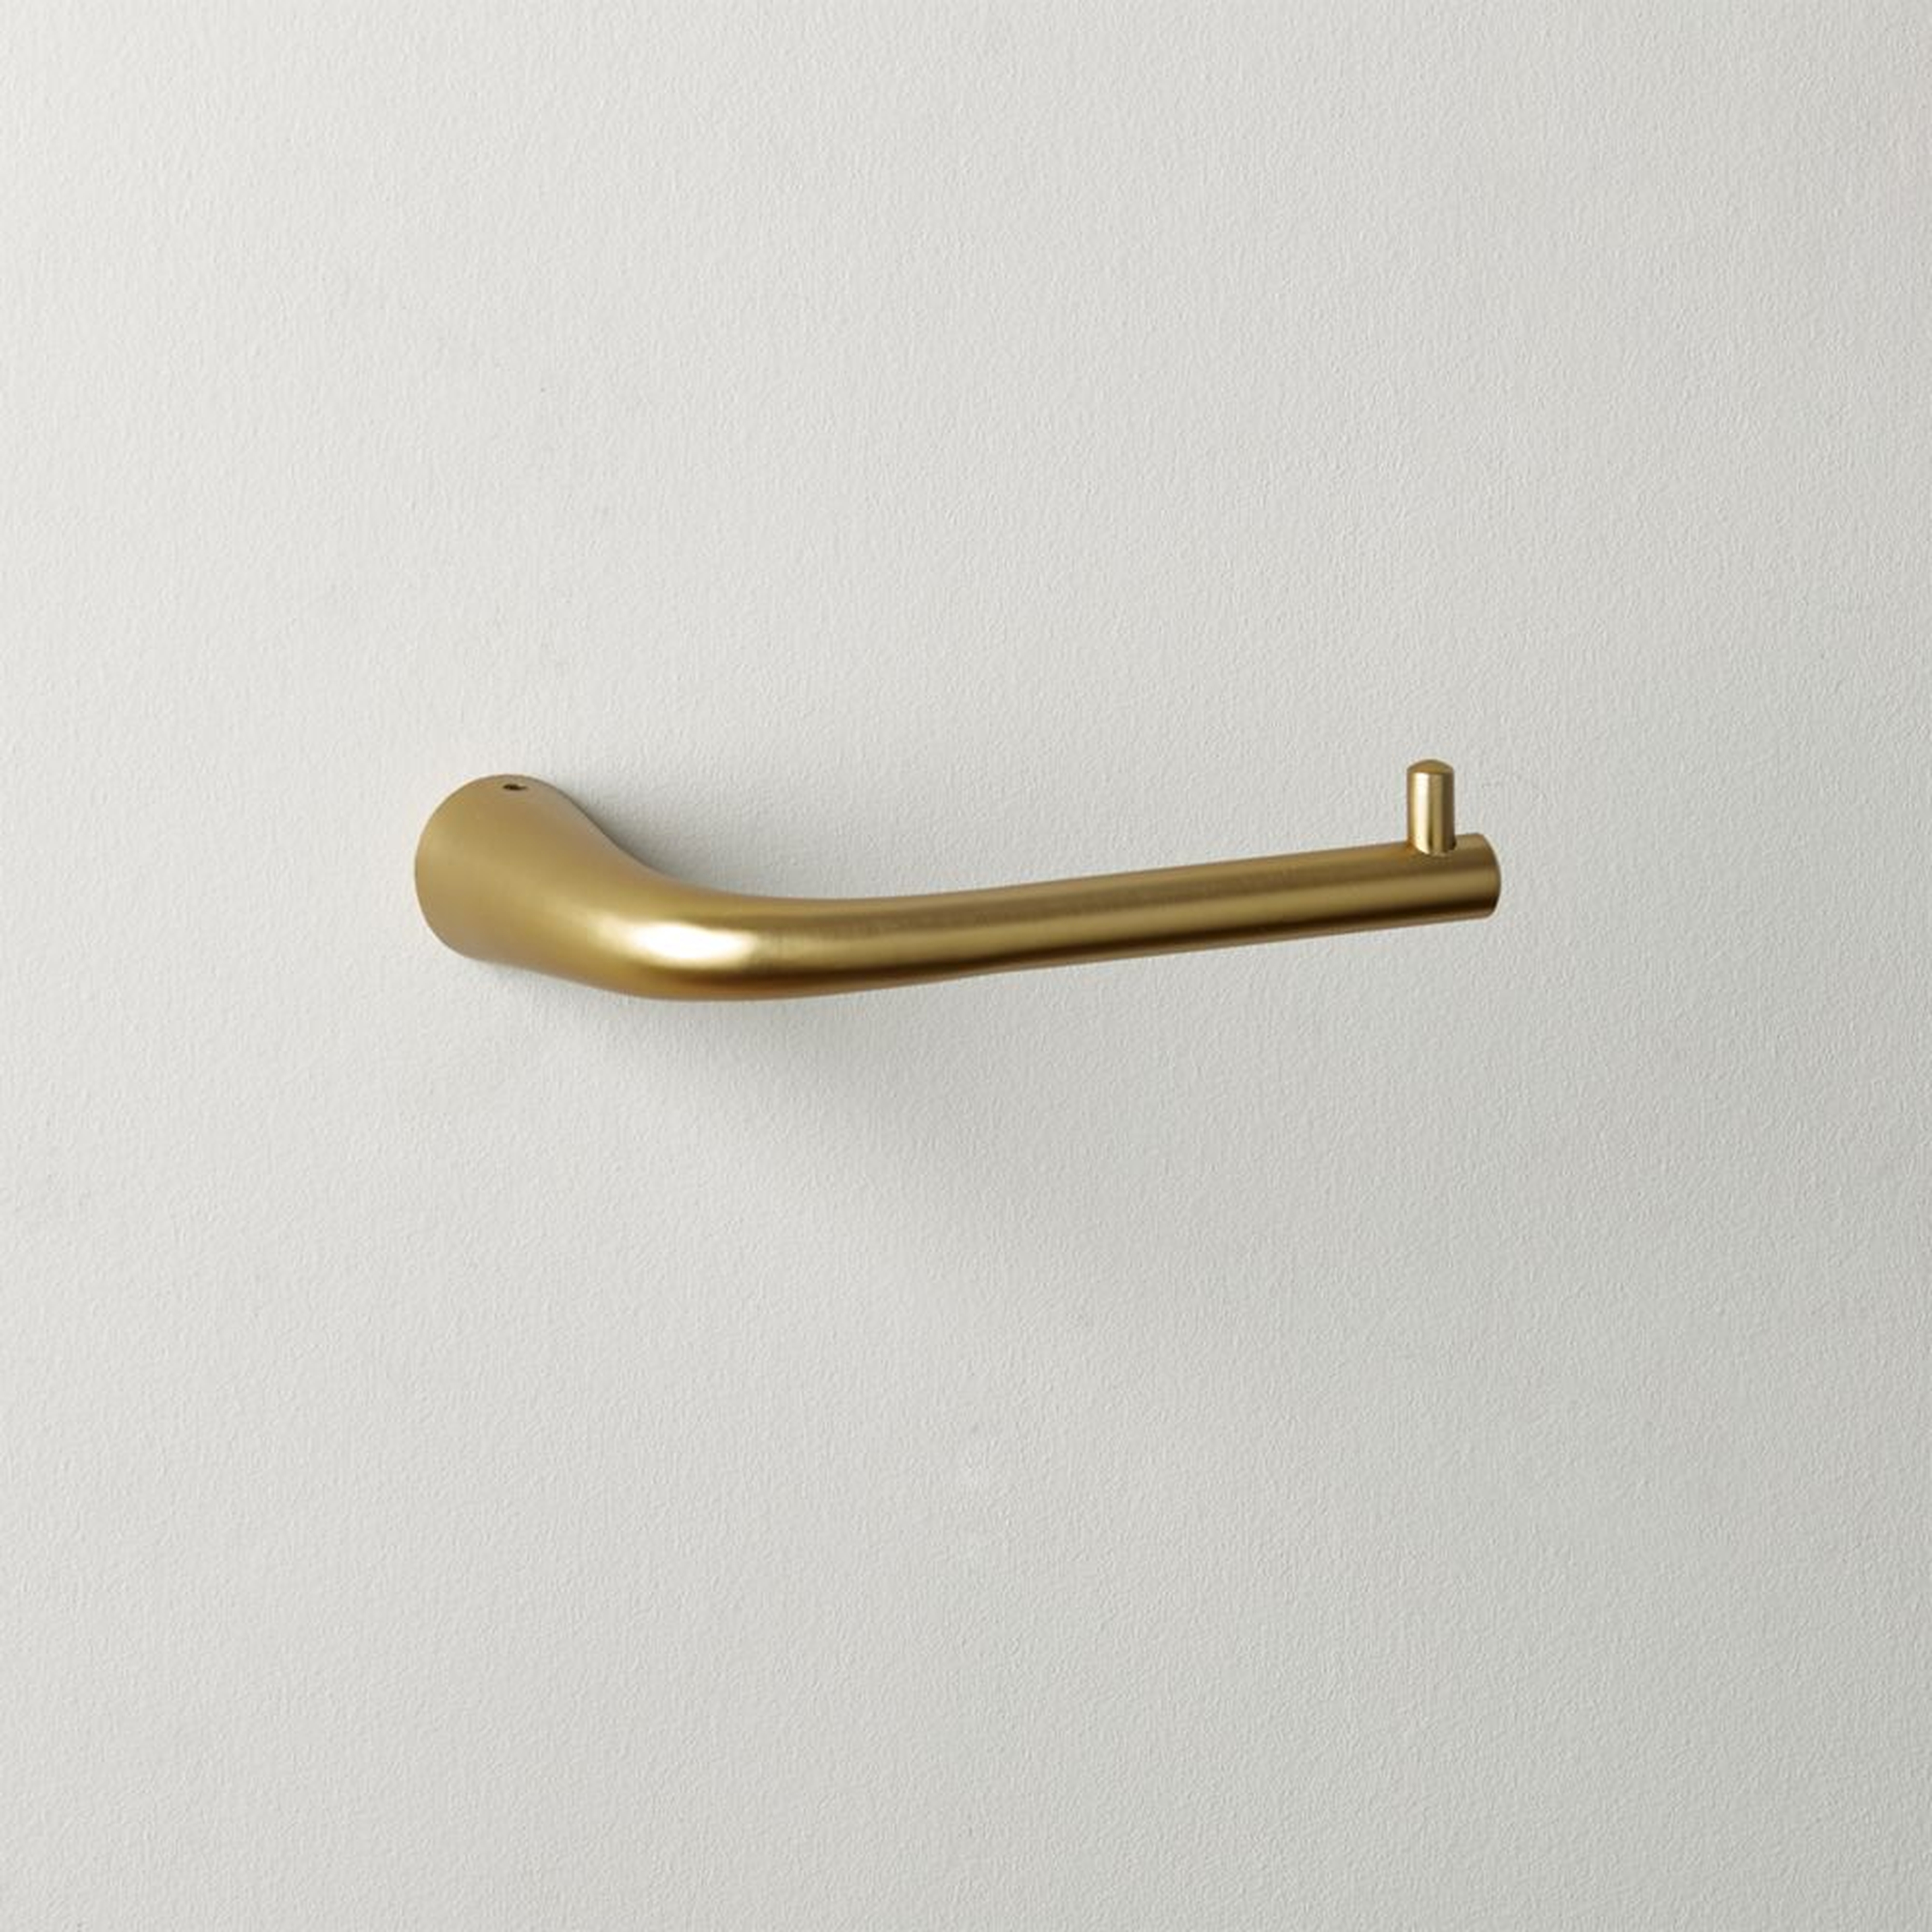 Pyra Brushed Brass Toilet Paper Holder - CB2